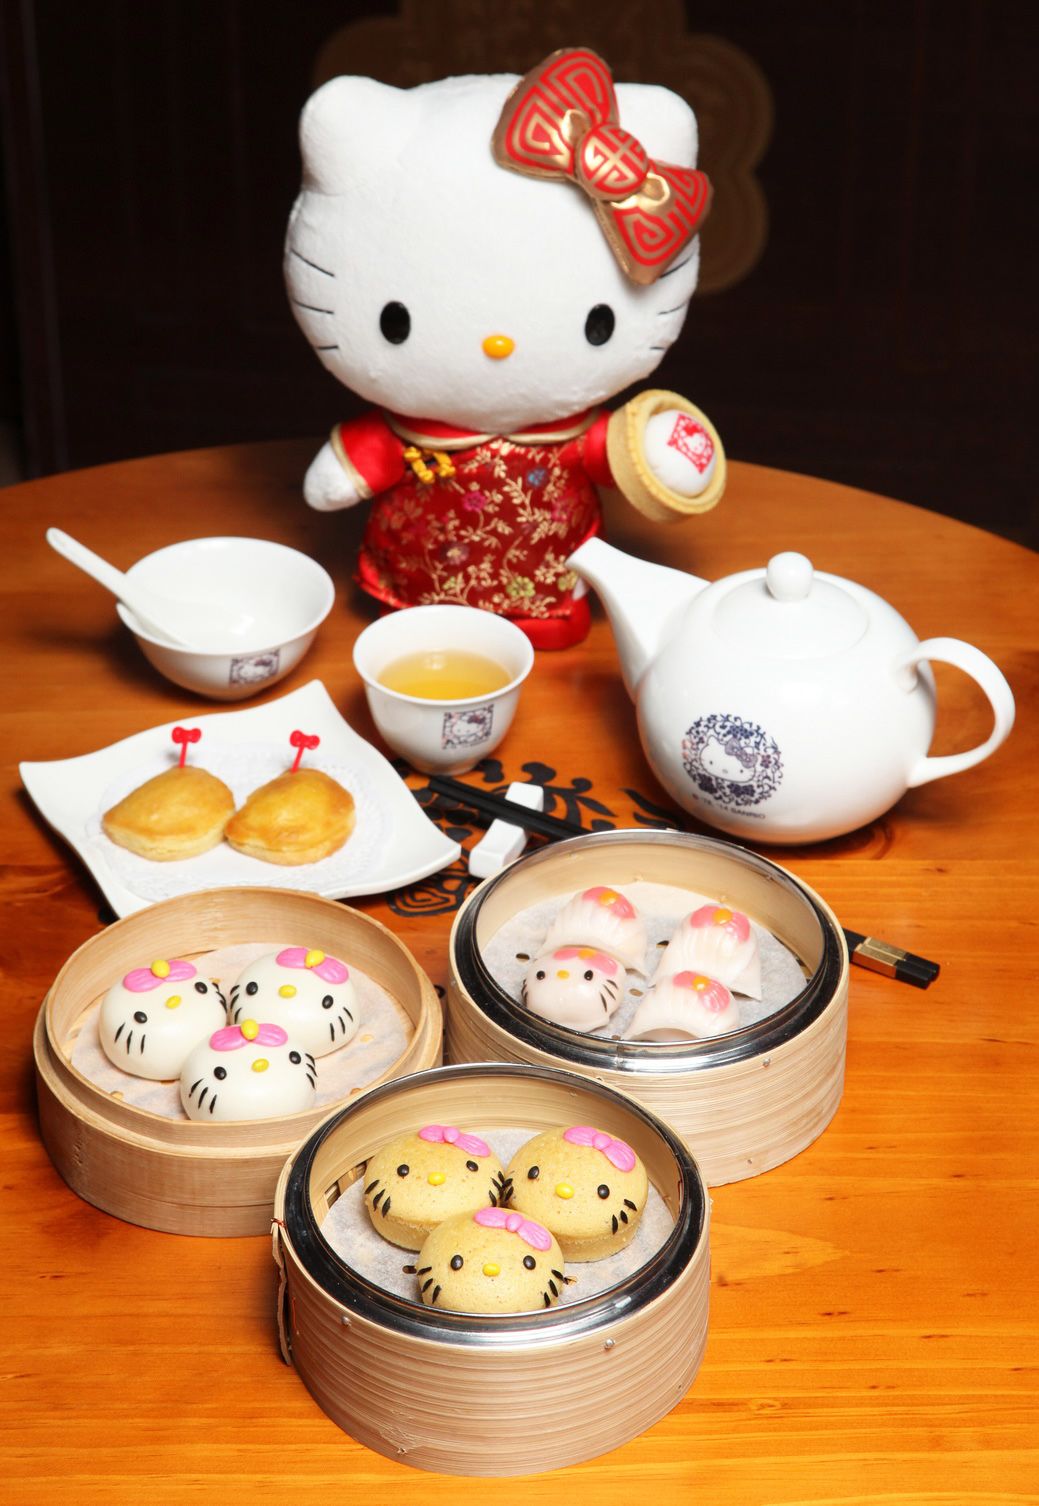 Gourmet cooking with Hello Kitty - CNET